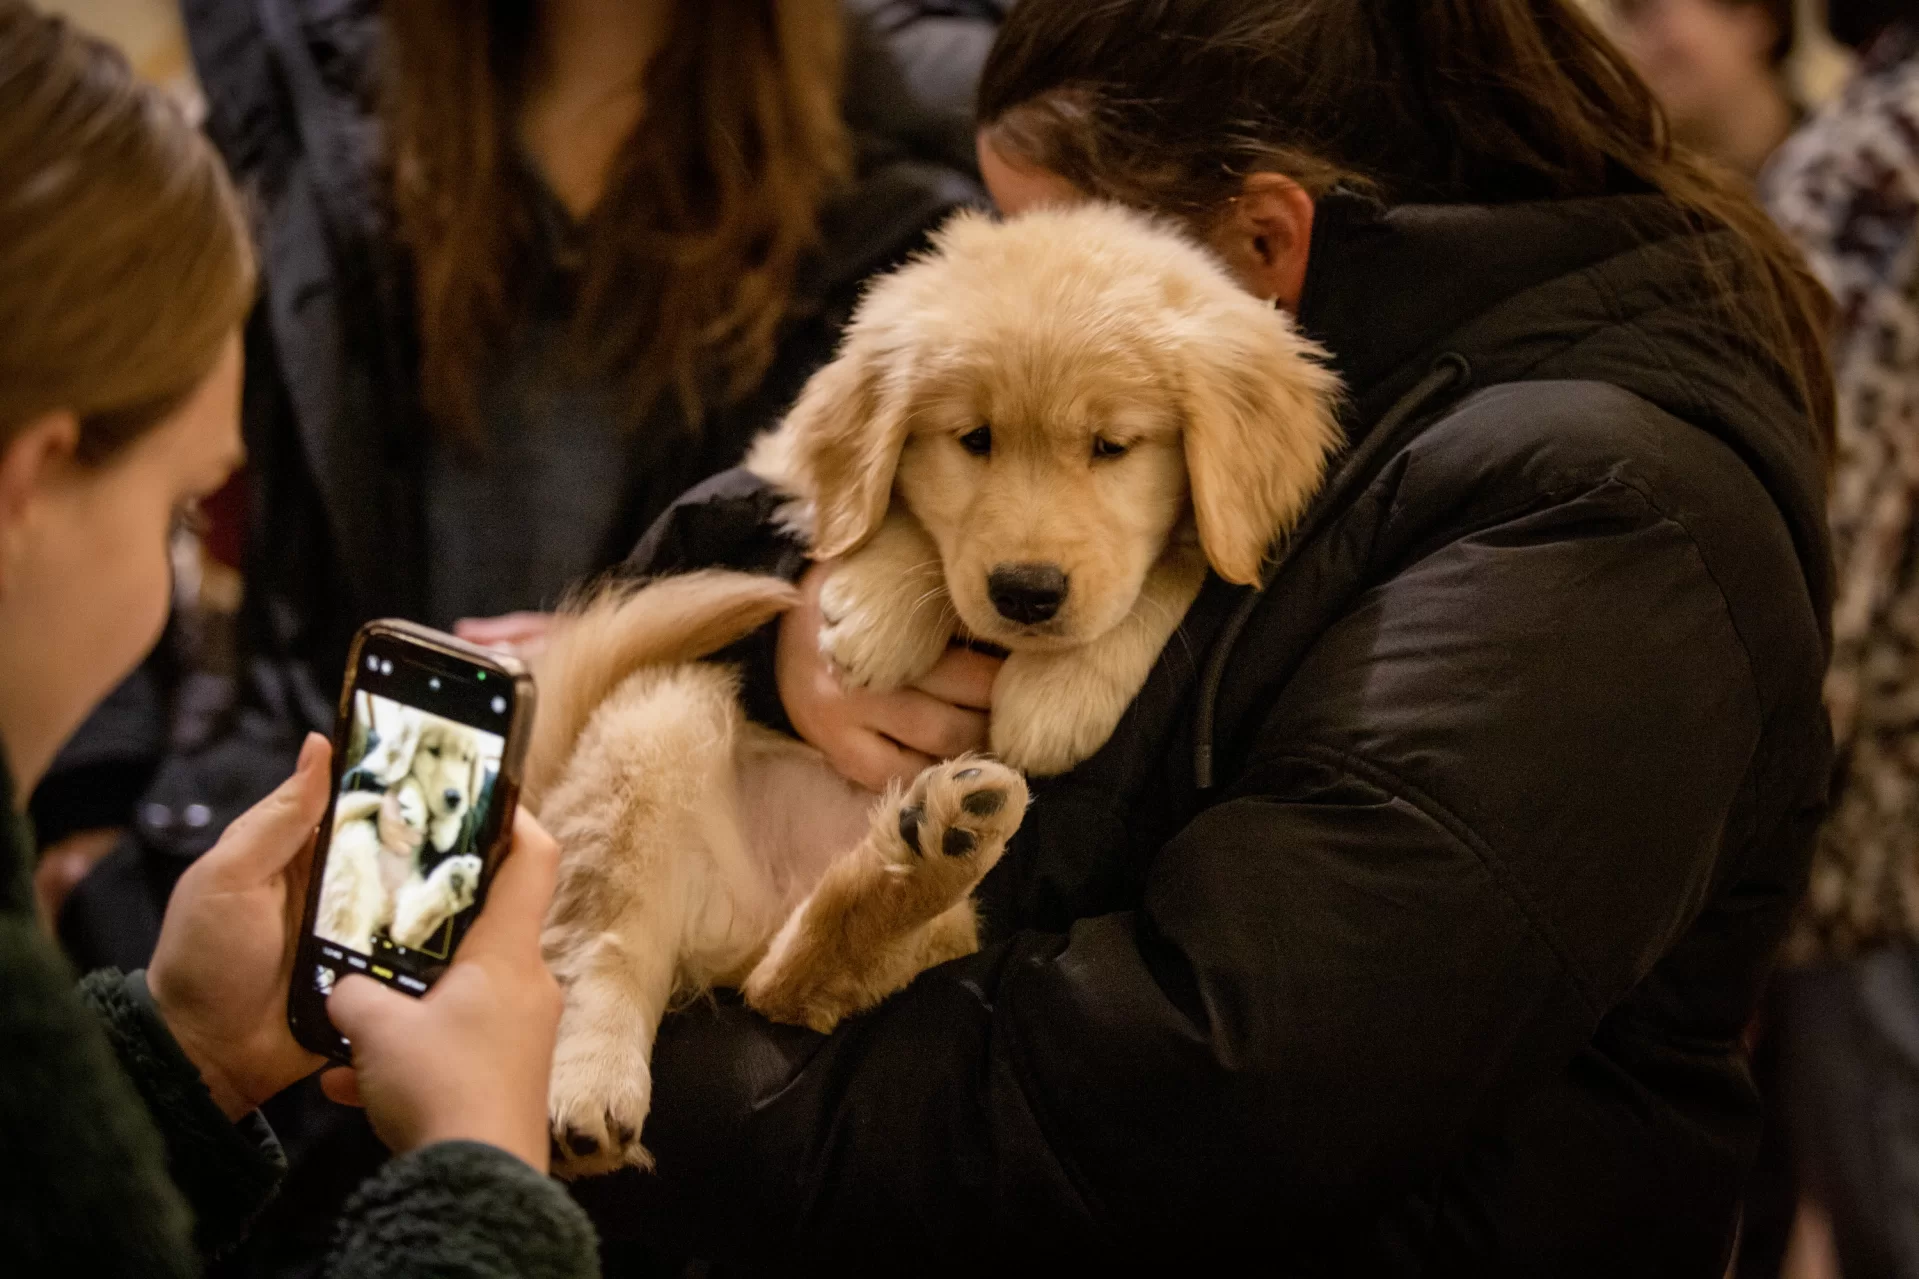 Several dogs visited Memorial Commons on Dec. 12 for students to spend some "chill" time with.